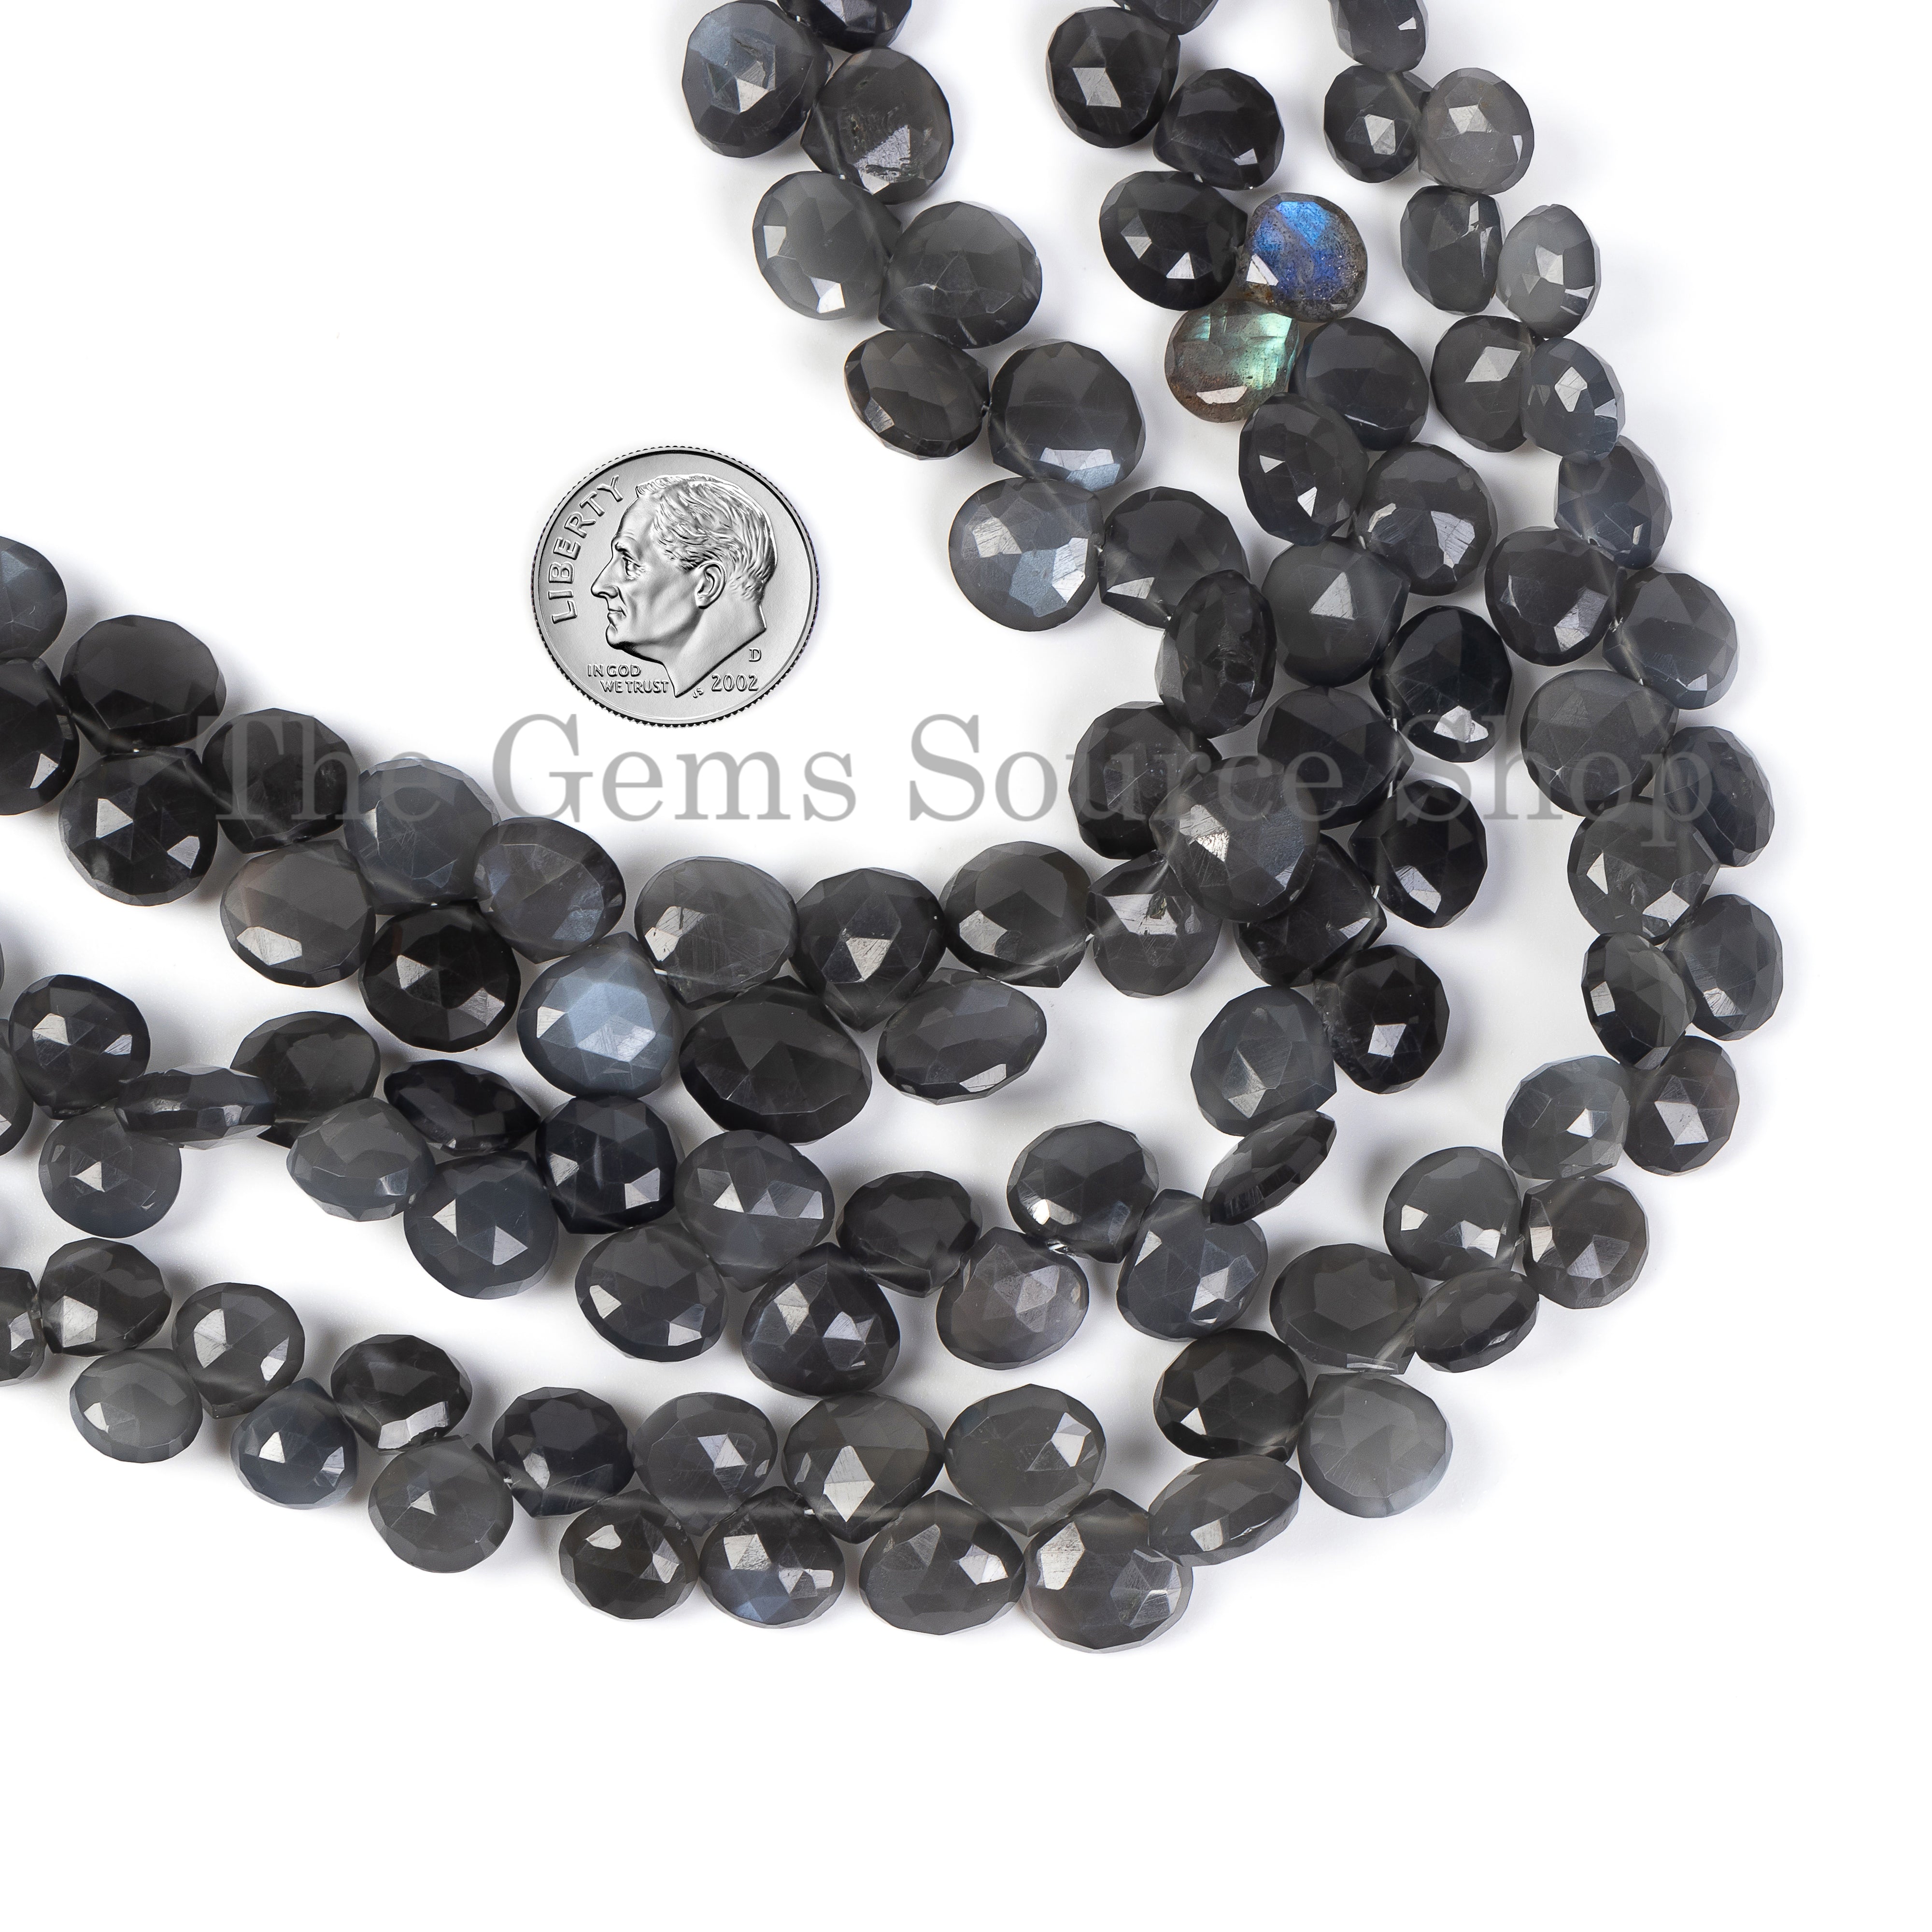 Natural Gray Moonstone Beads, Gray Moonstone Faceted Heart Beads for Jewelry Making.